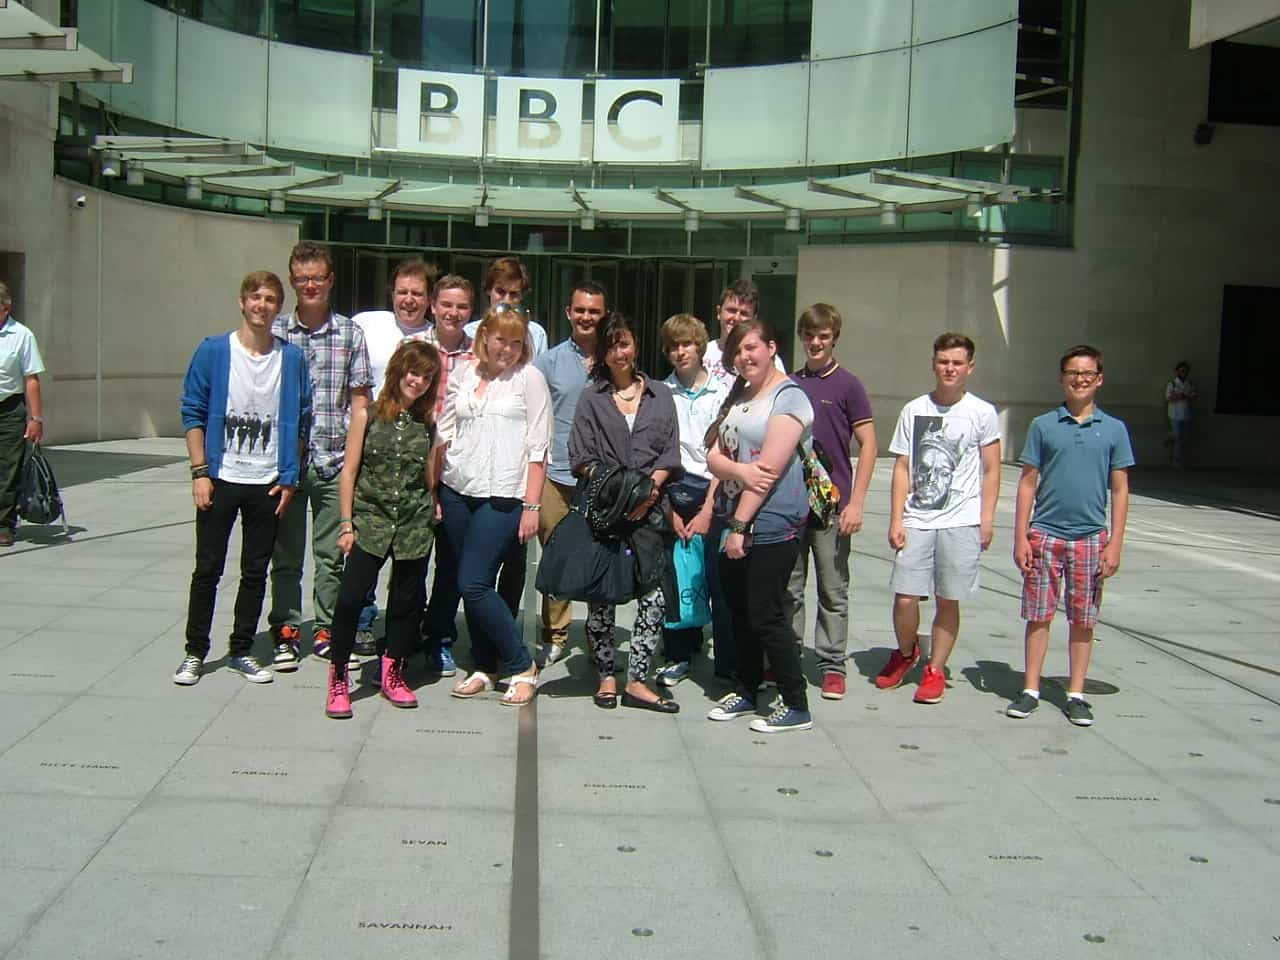 Featured image for “Gateway heads to London for BBC Broadcasting House”